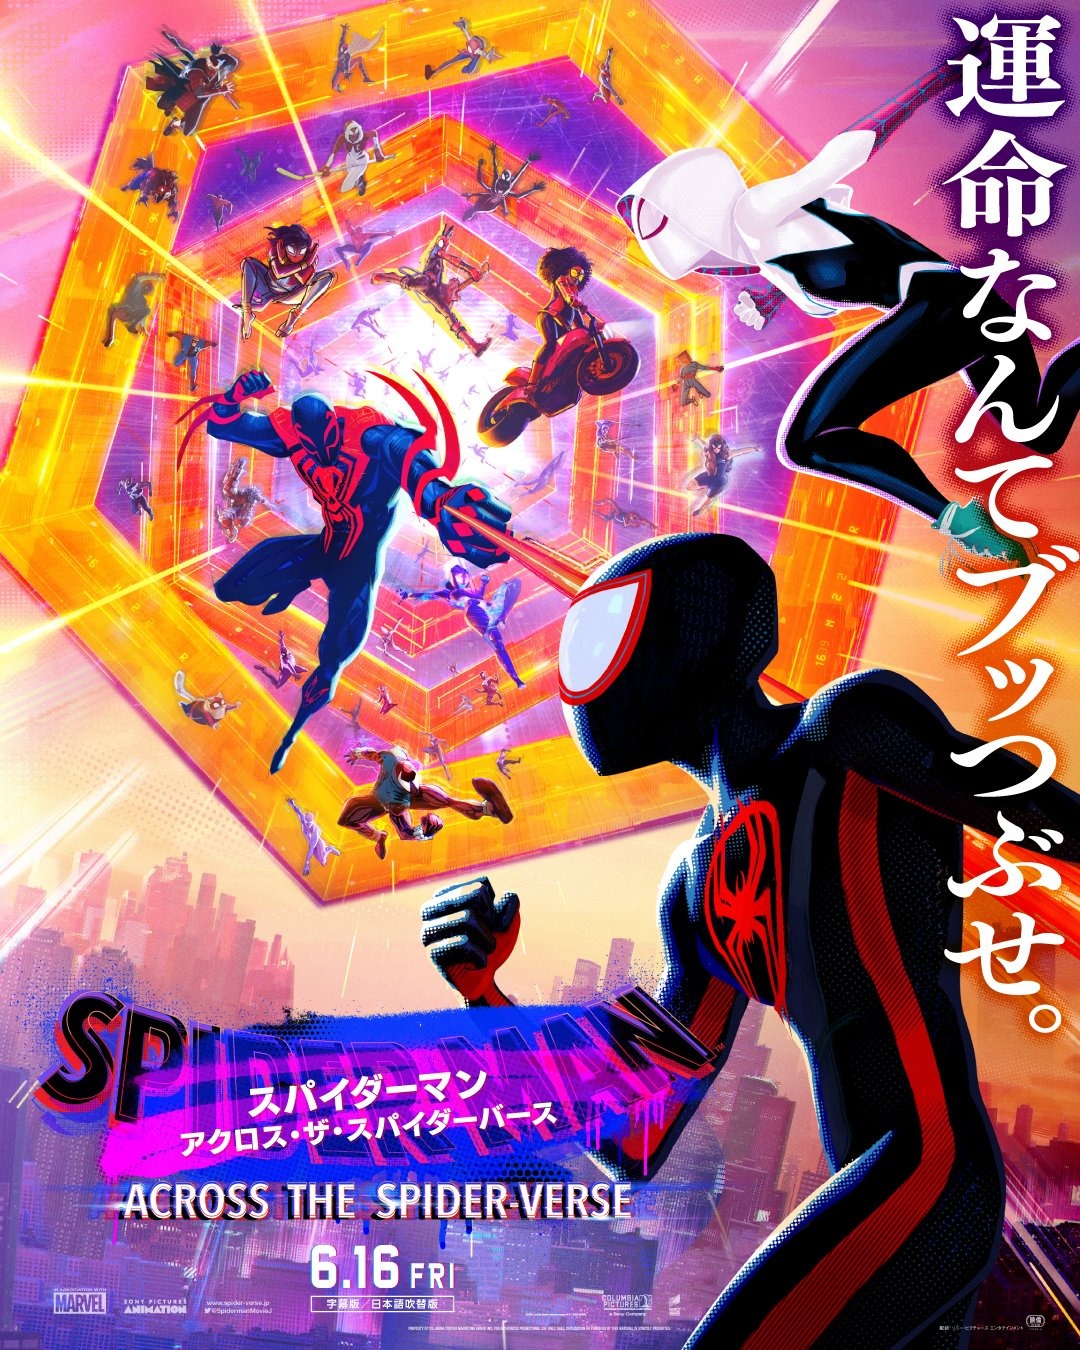 Extra Large Movie Poster Image for Spider-Man: Across the Spider-Verse (#10 of 38)